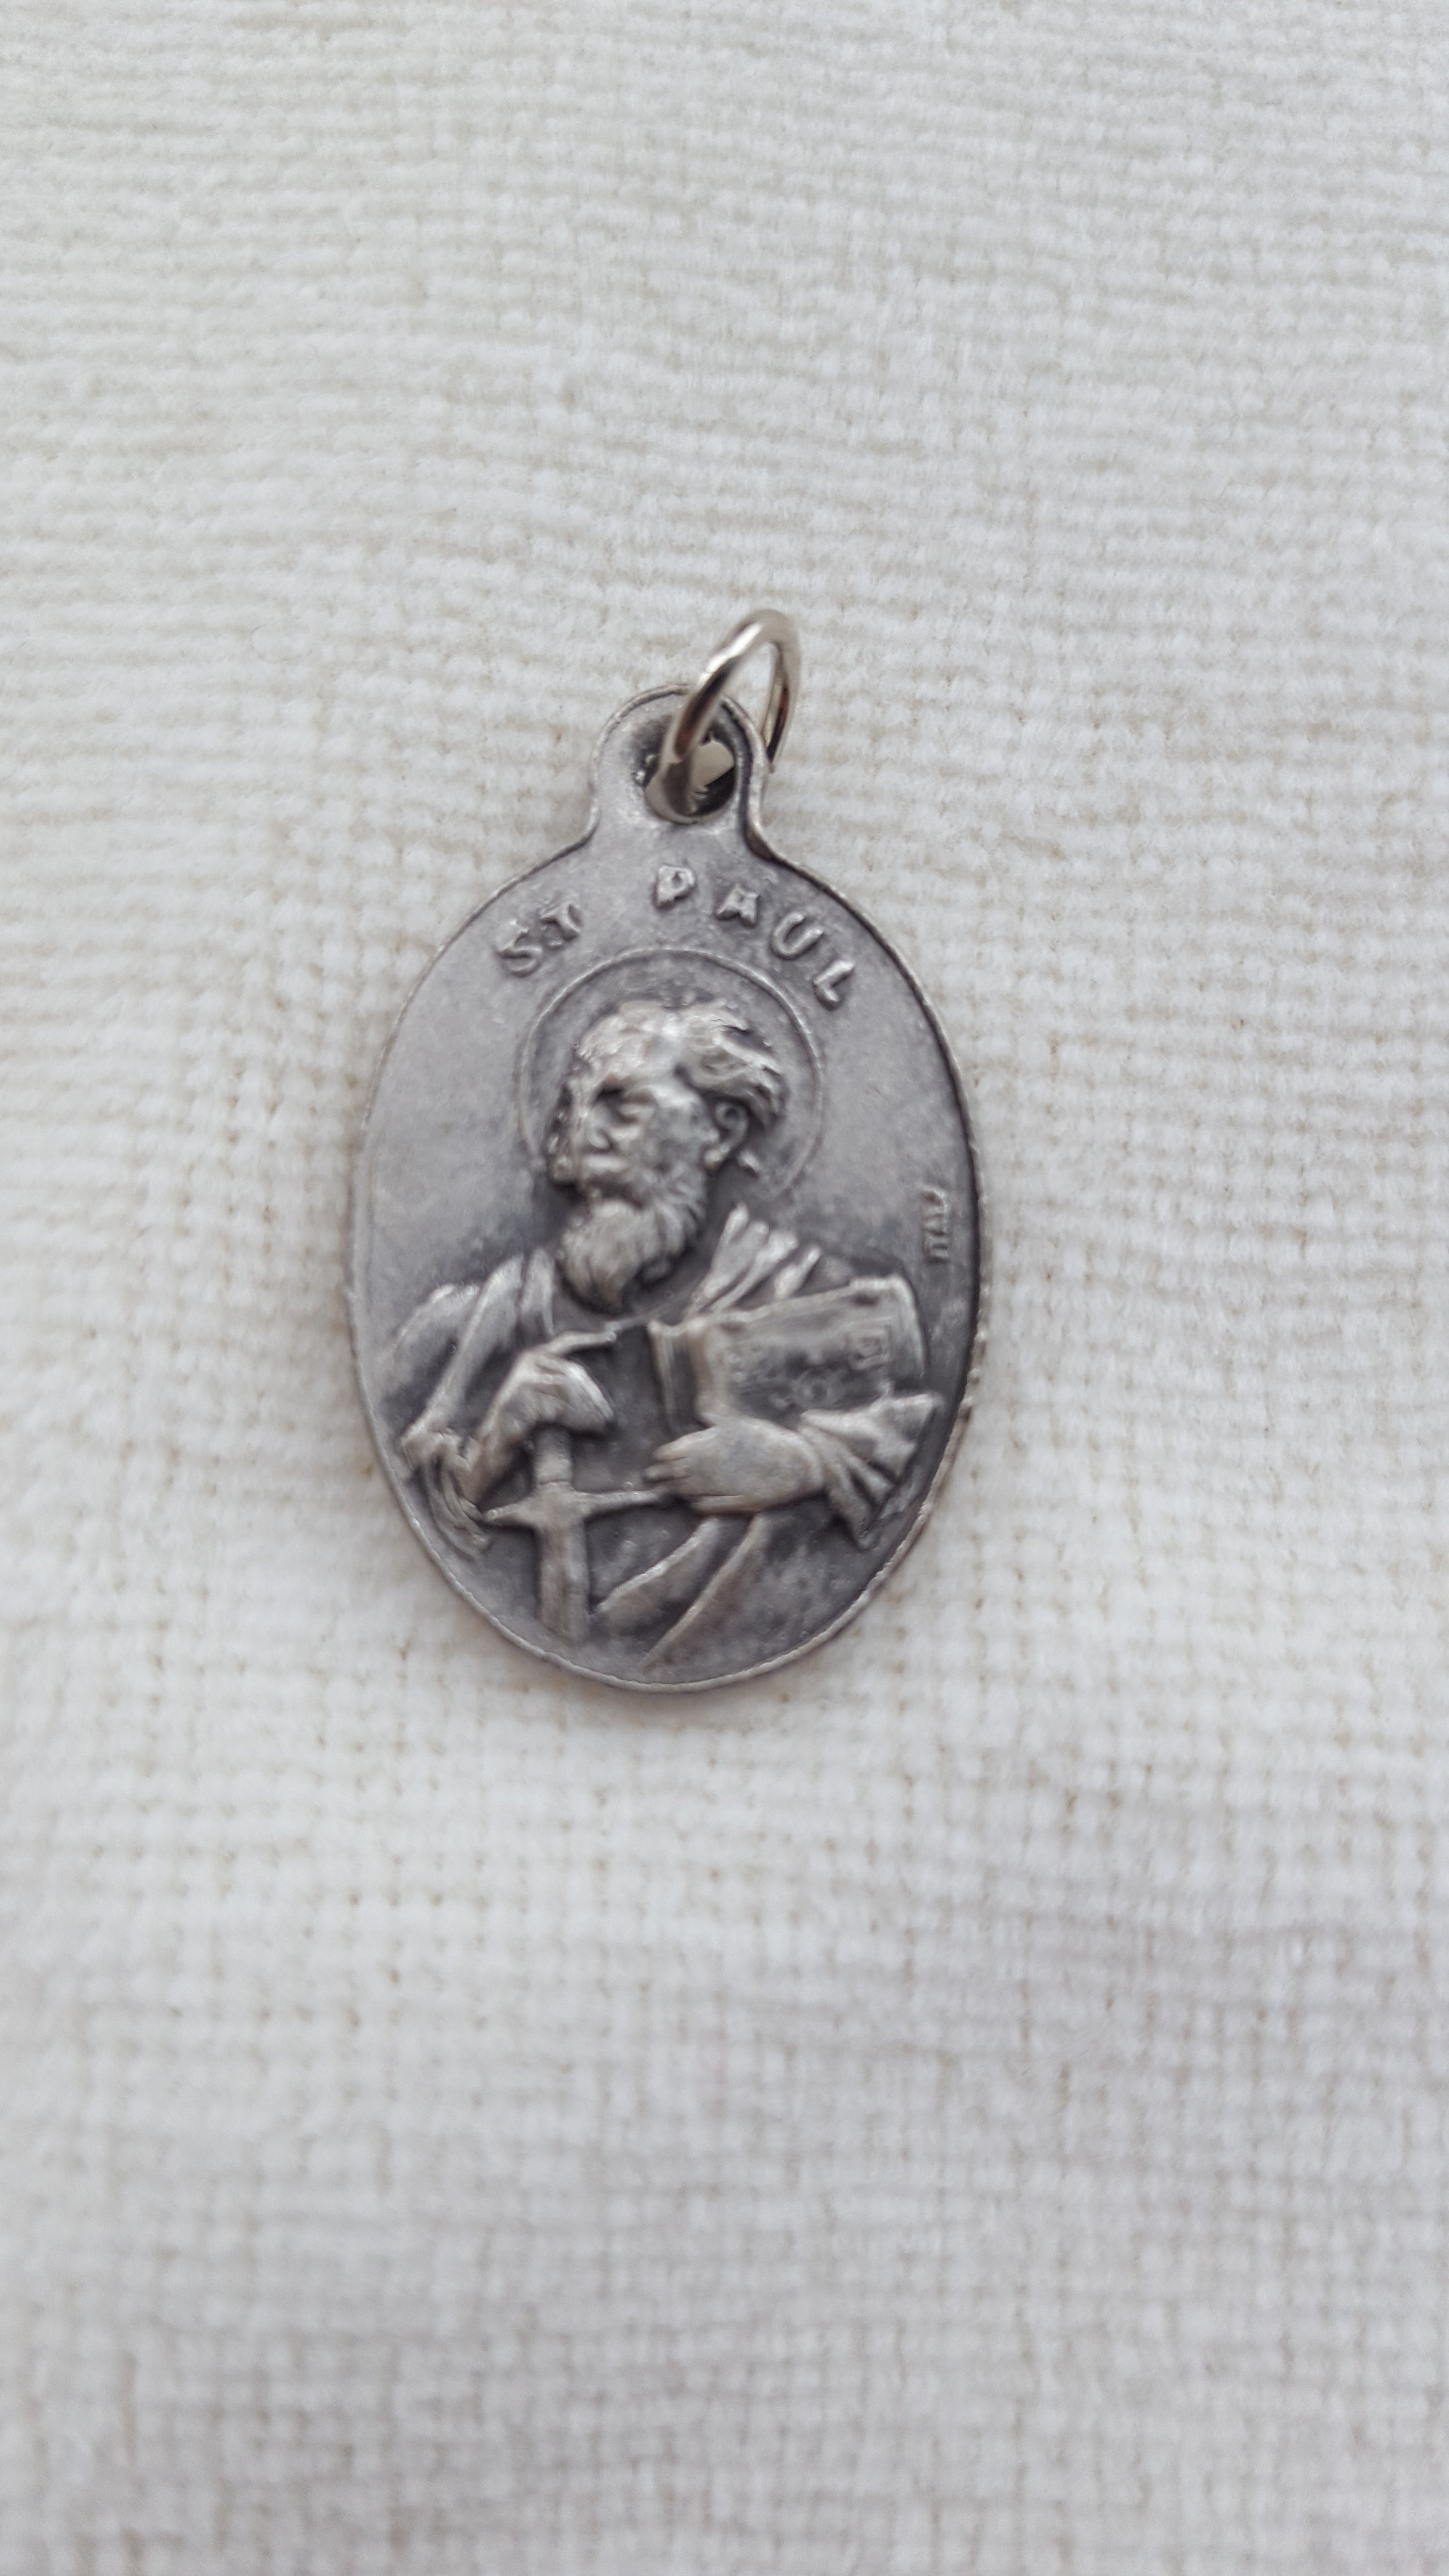 St. Peter/Paul Oxidized Medal